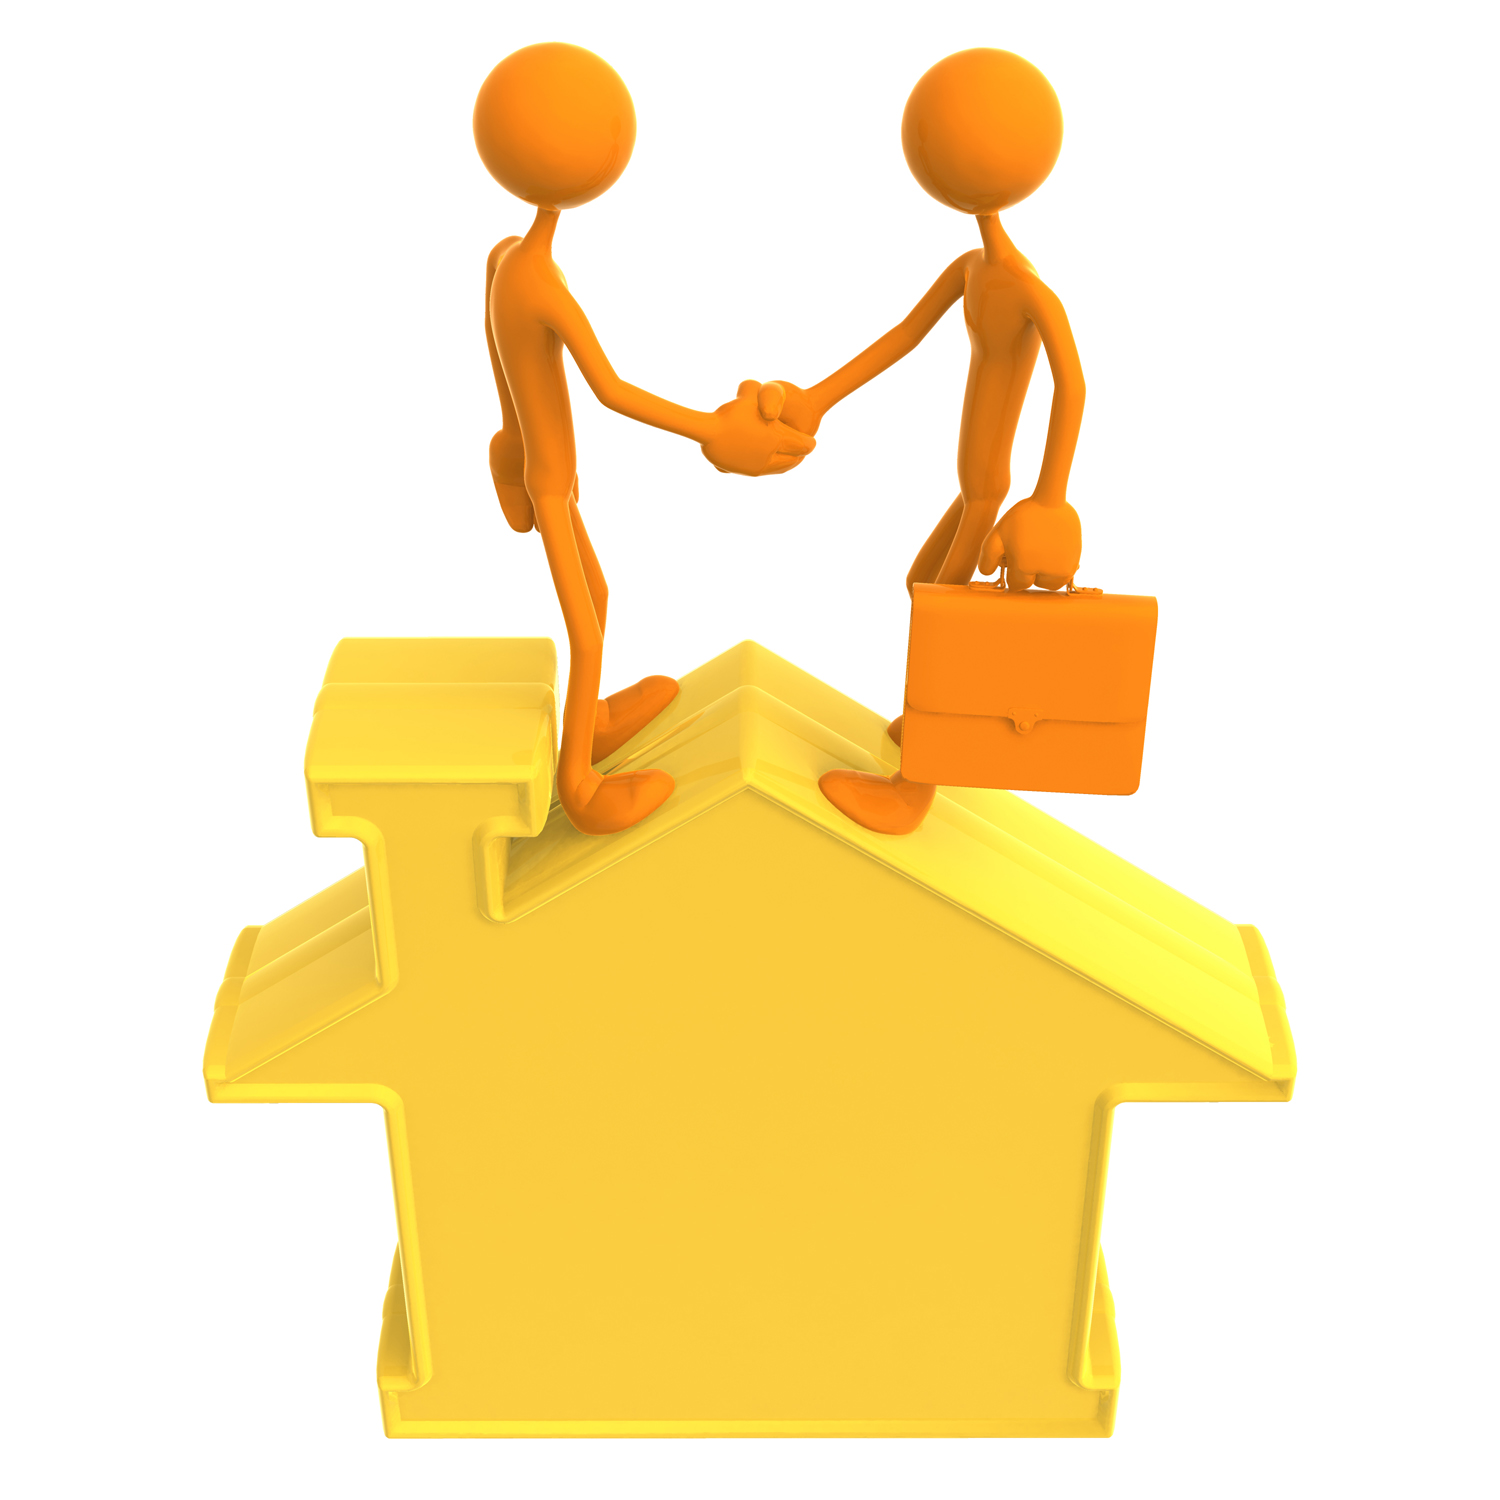 two stick figures shaking hands on top of a house